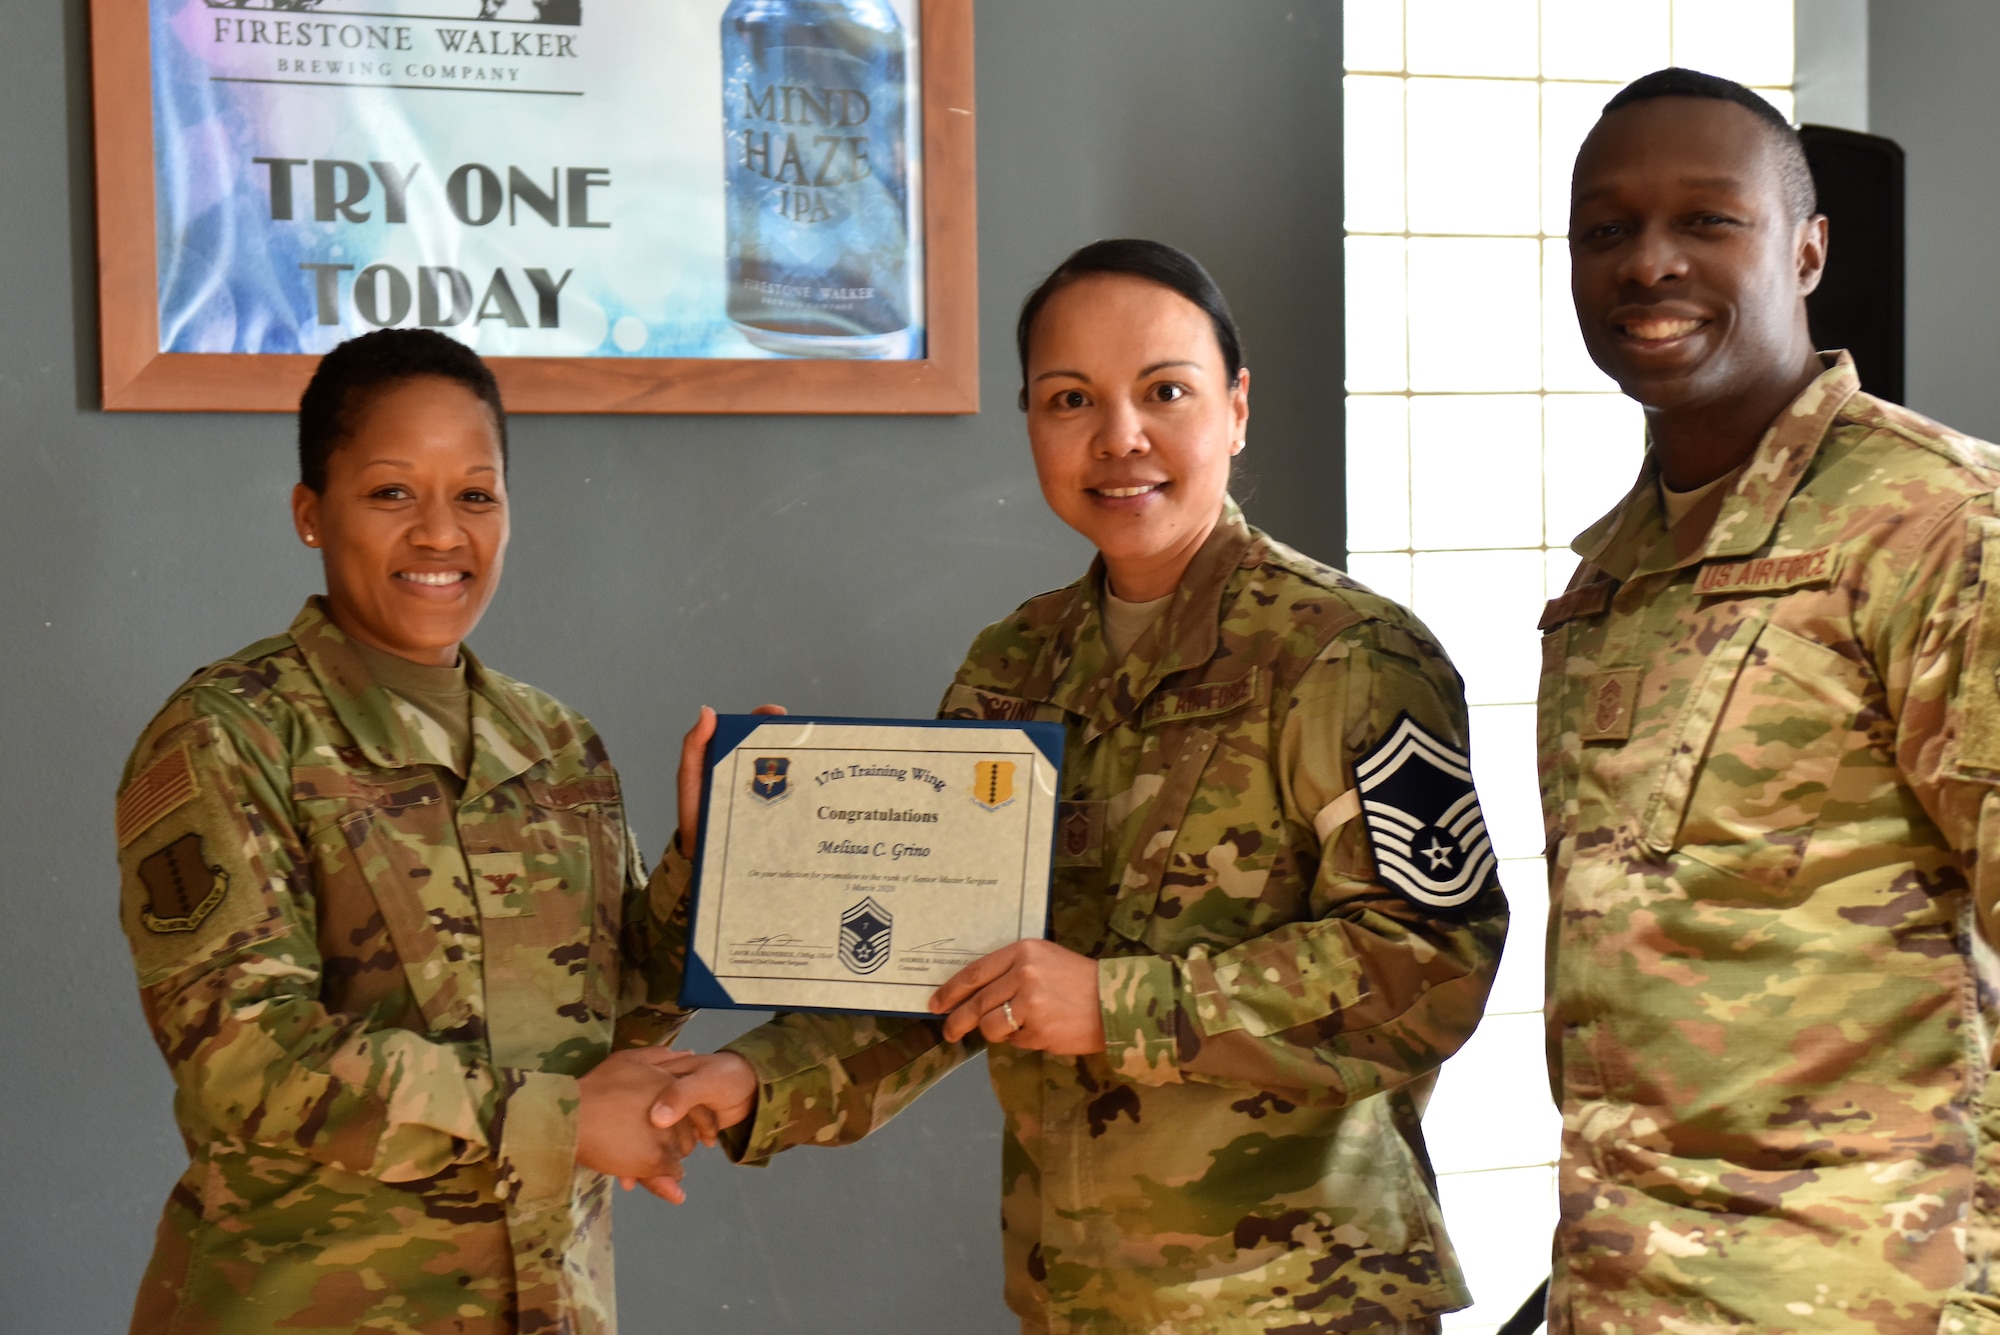 U.S. Air Force Col. Lauren Bryd, 17th Medical Group commander, presents Senior Master Sgt. select Melissa Grino, 17th Operational Medical Readiness Squadron dental fight chief, with her certificate indicating her line number during the senior master sgt. release party at the event center on Goodfellow Air Force Base, Texas, March 3, 2020. This year out of 15,544 only 1,184 individuals were selected to progress from the rank of master sgt. to senior master sgt. (U.S. Air Force photo by Senior Airman Seraiah Wolf)